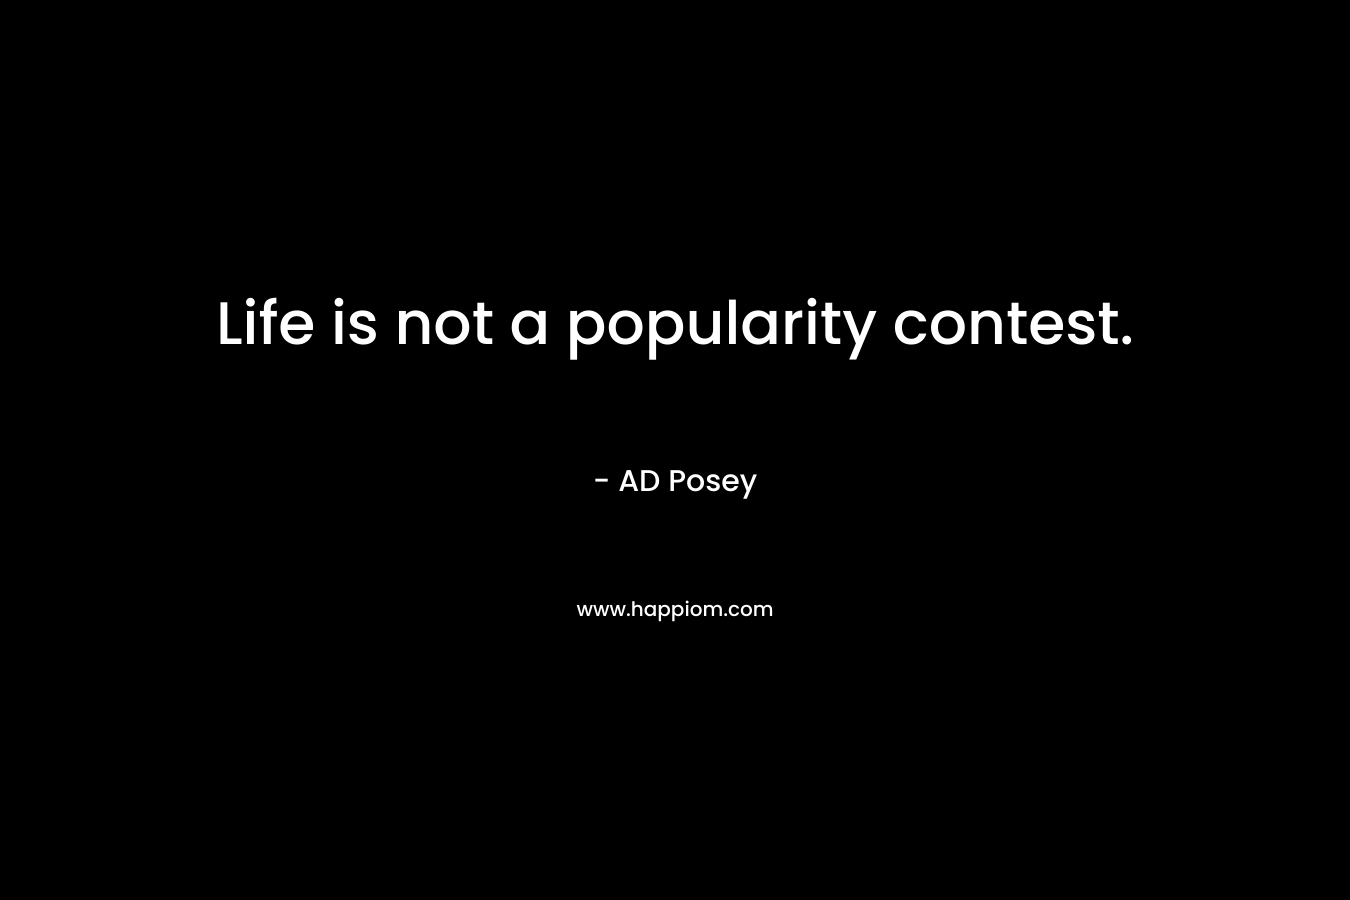 Life is not a popularity contest.